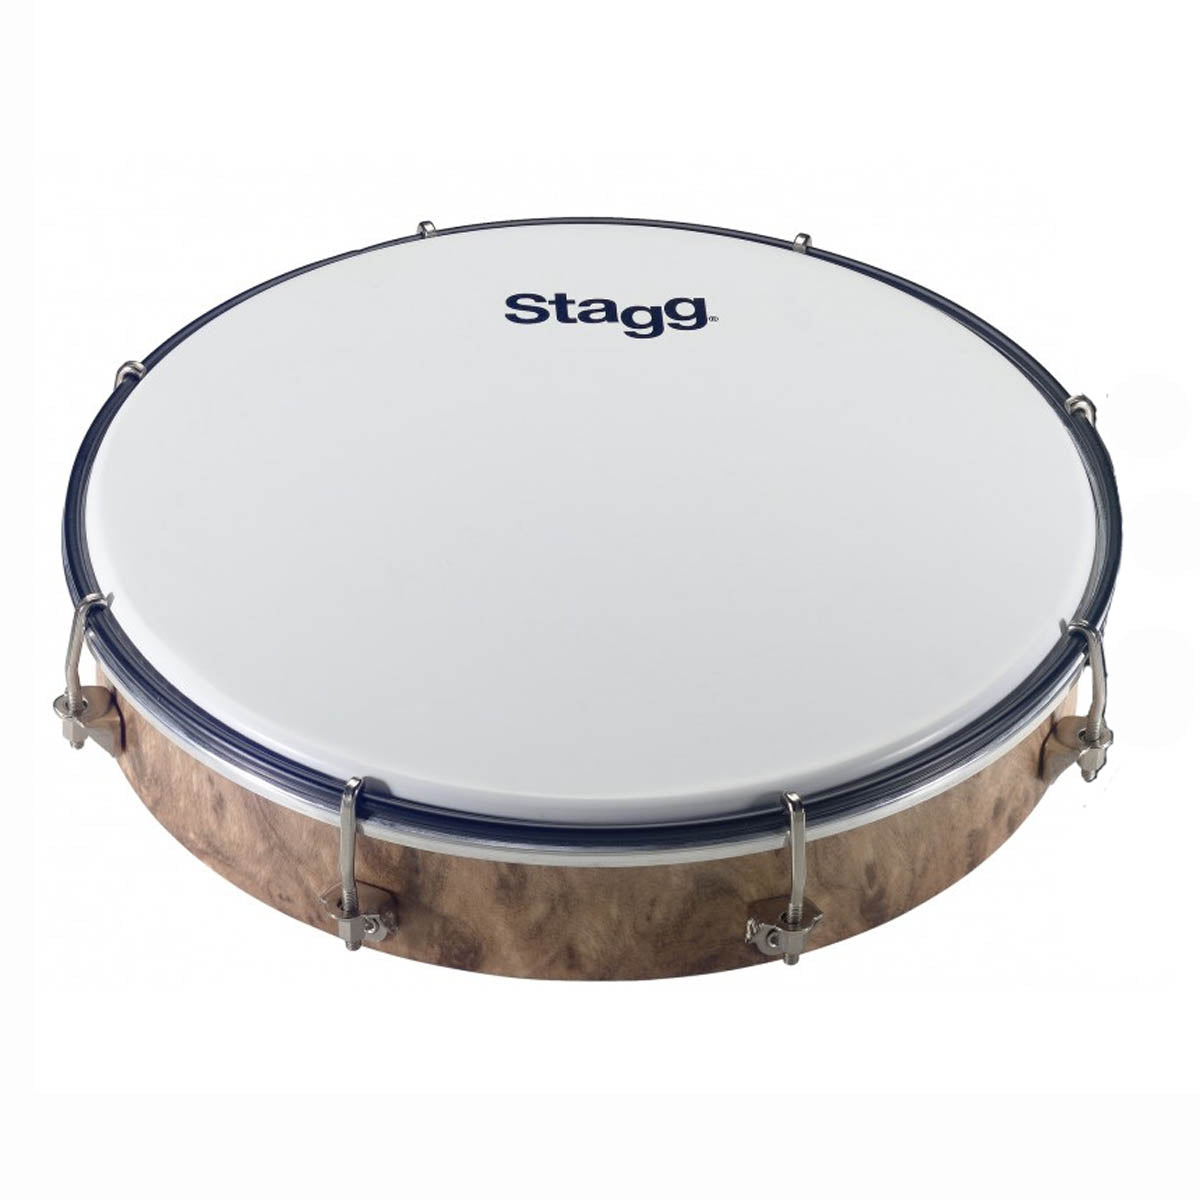 Stagg 10" Tuneable Frame Drum